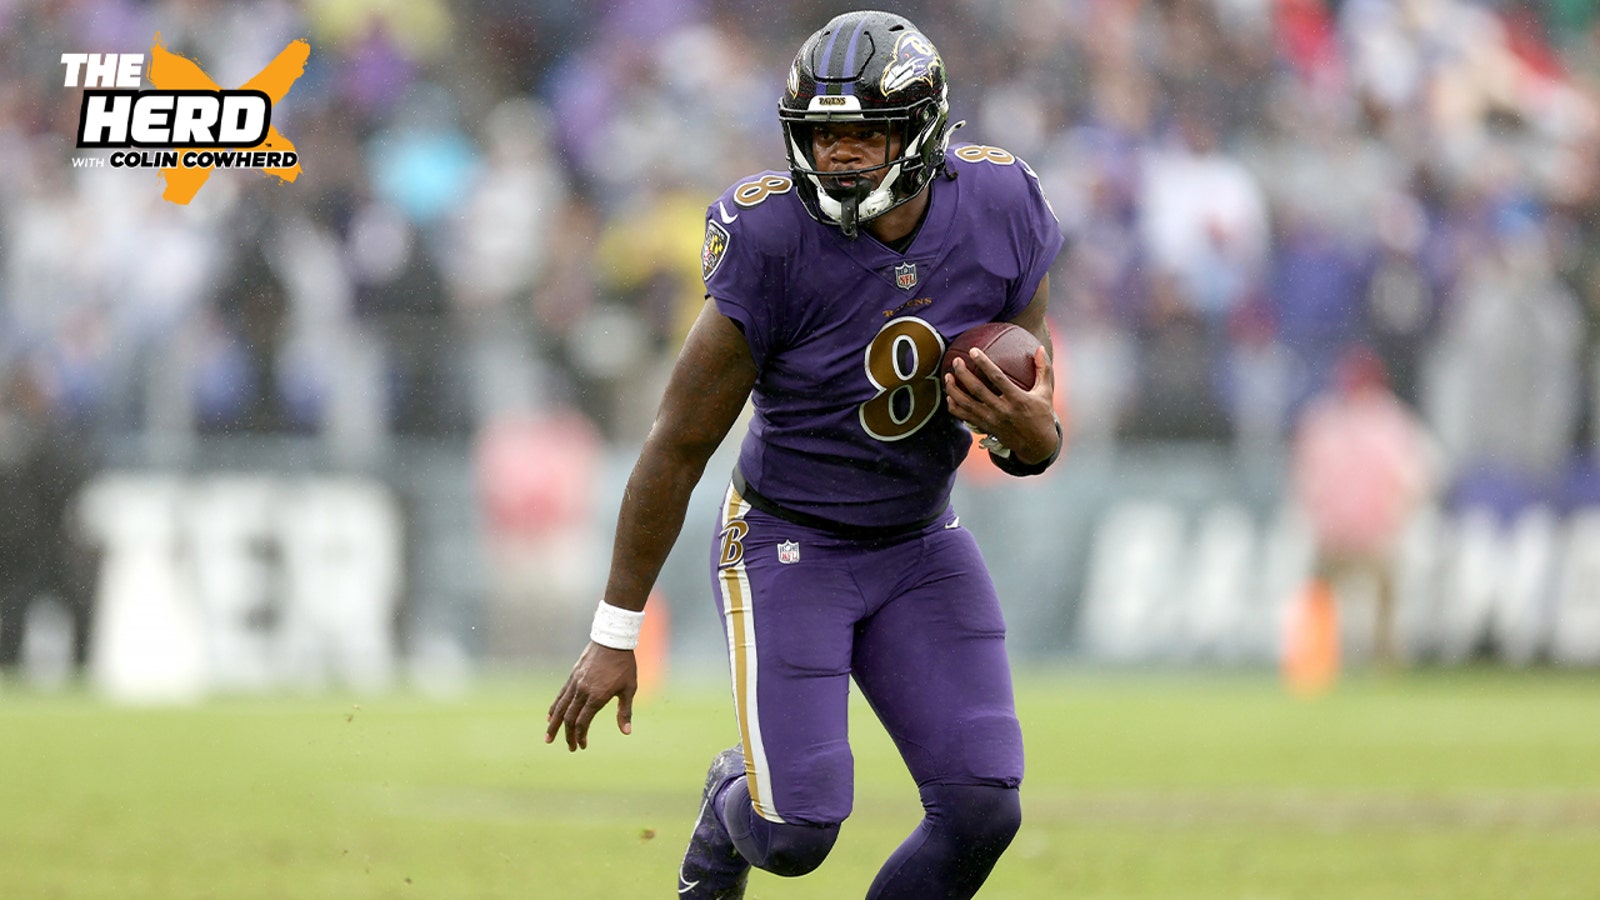 Should the Ravens go all-in and pay Lamar Jackson? 